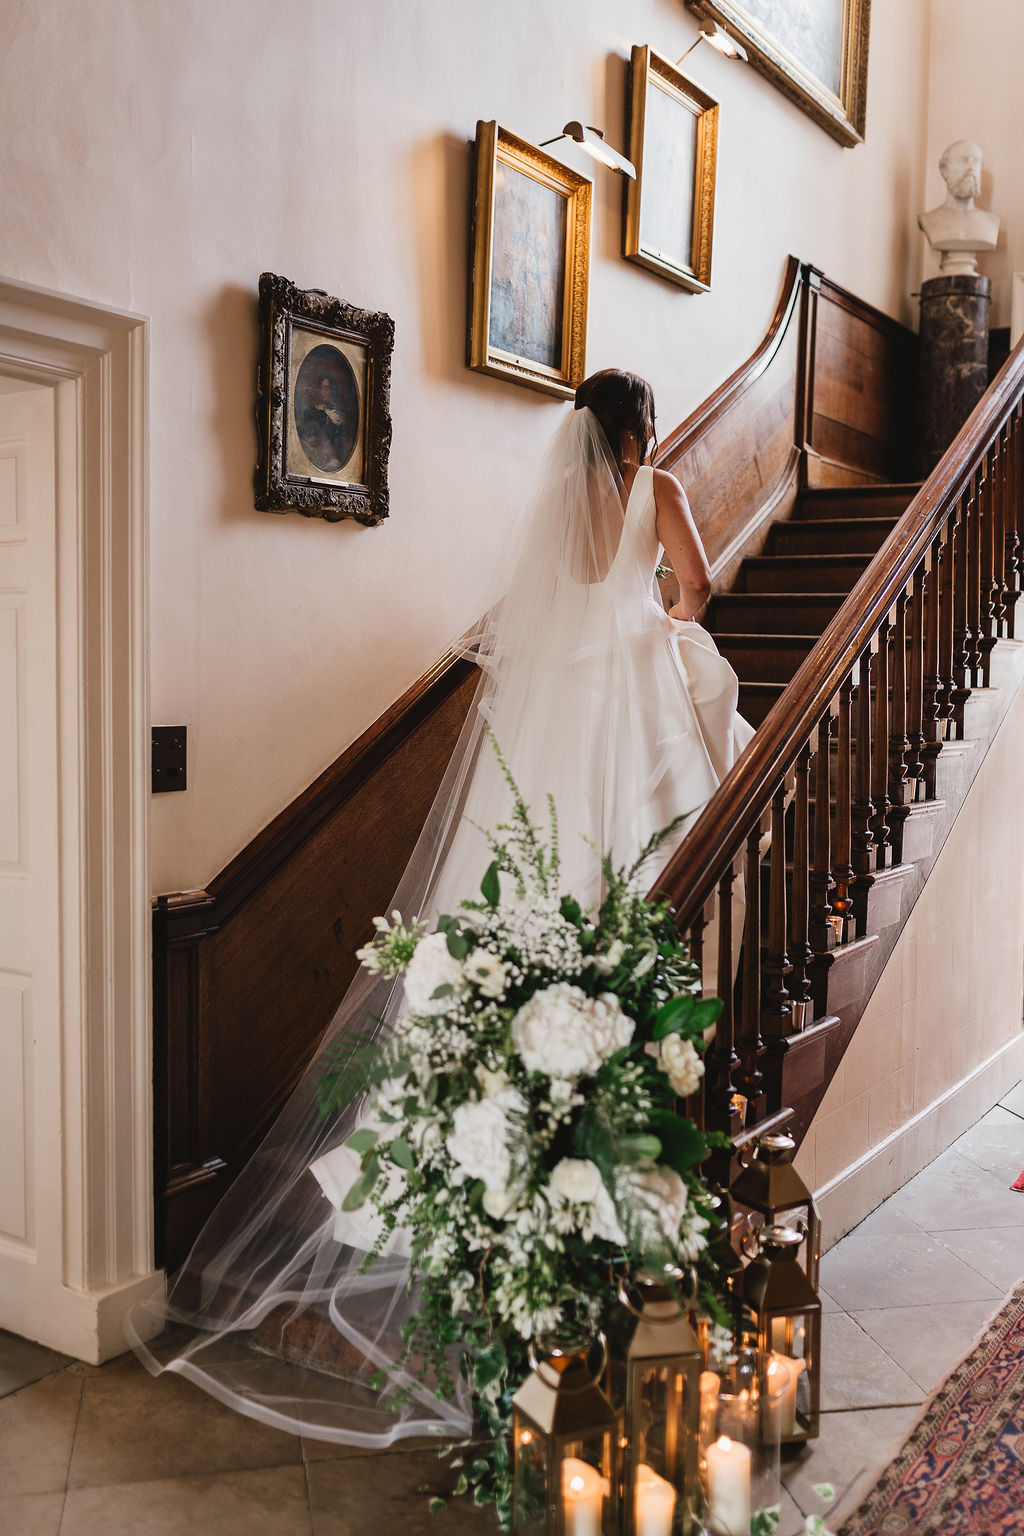 A bride in a white wedding dress and long veil walks up an antique wooden staircase that has candles arranged at the bottom and white and green flowers entwined around the bannister